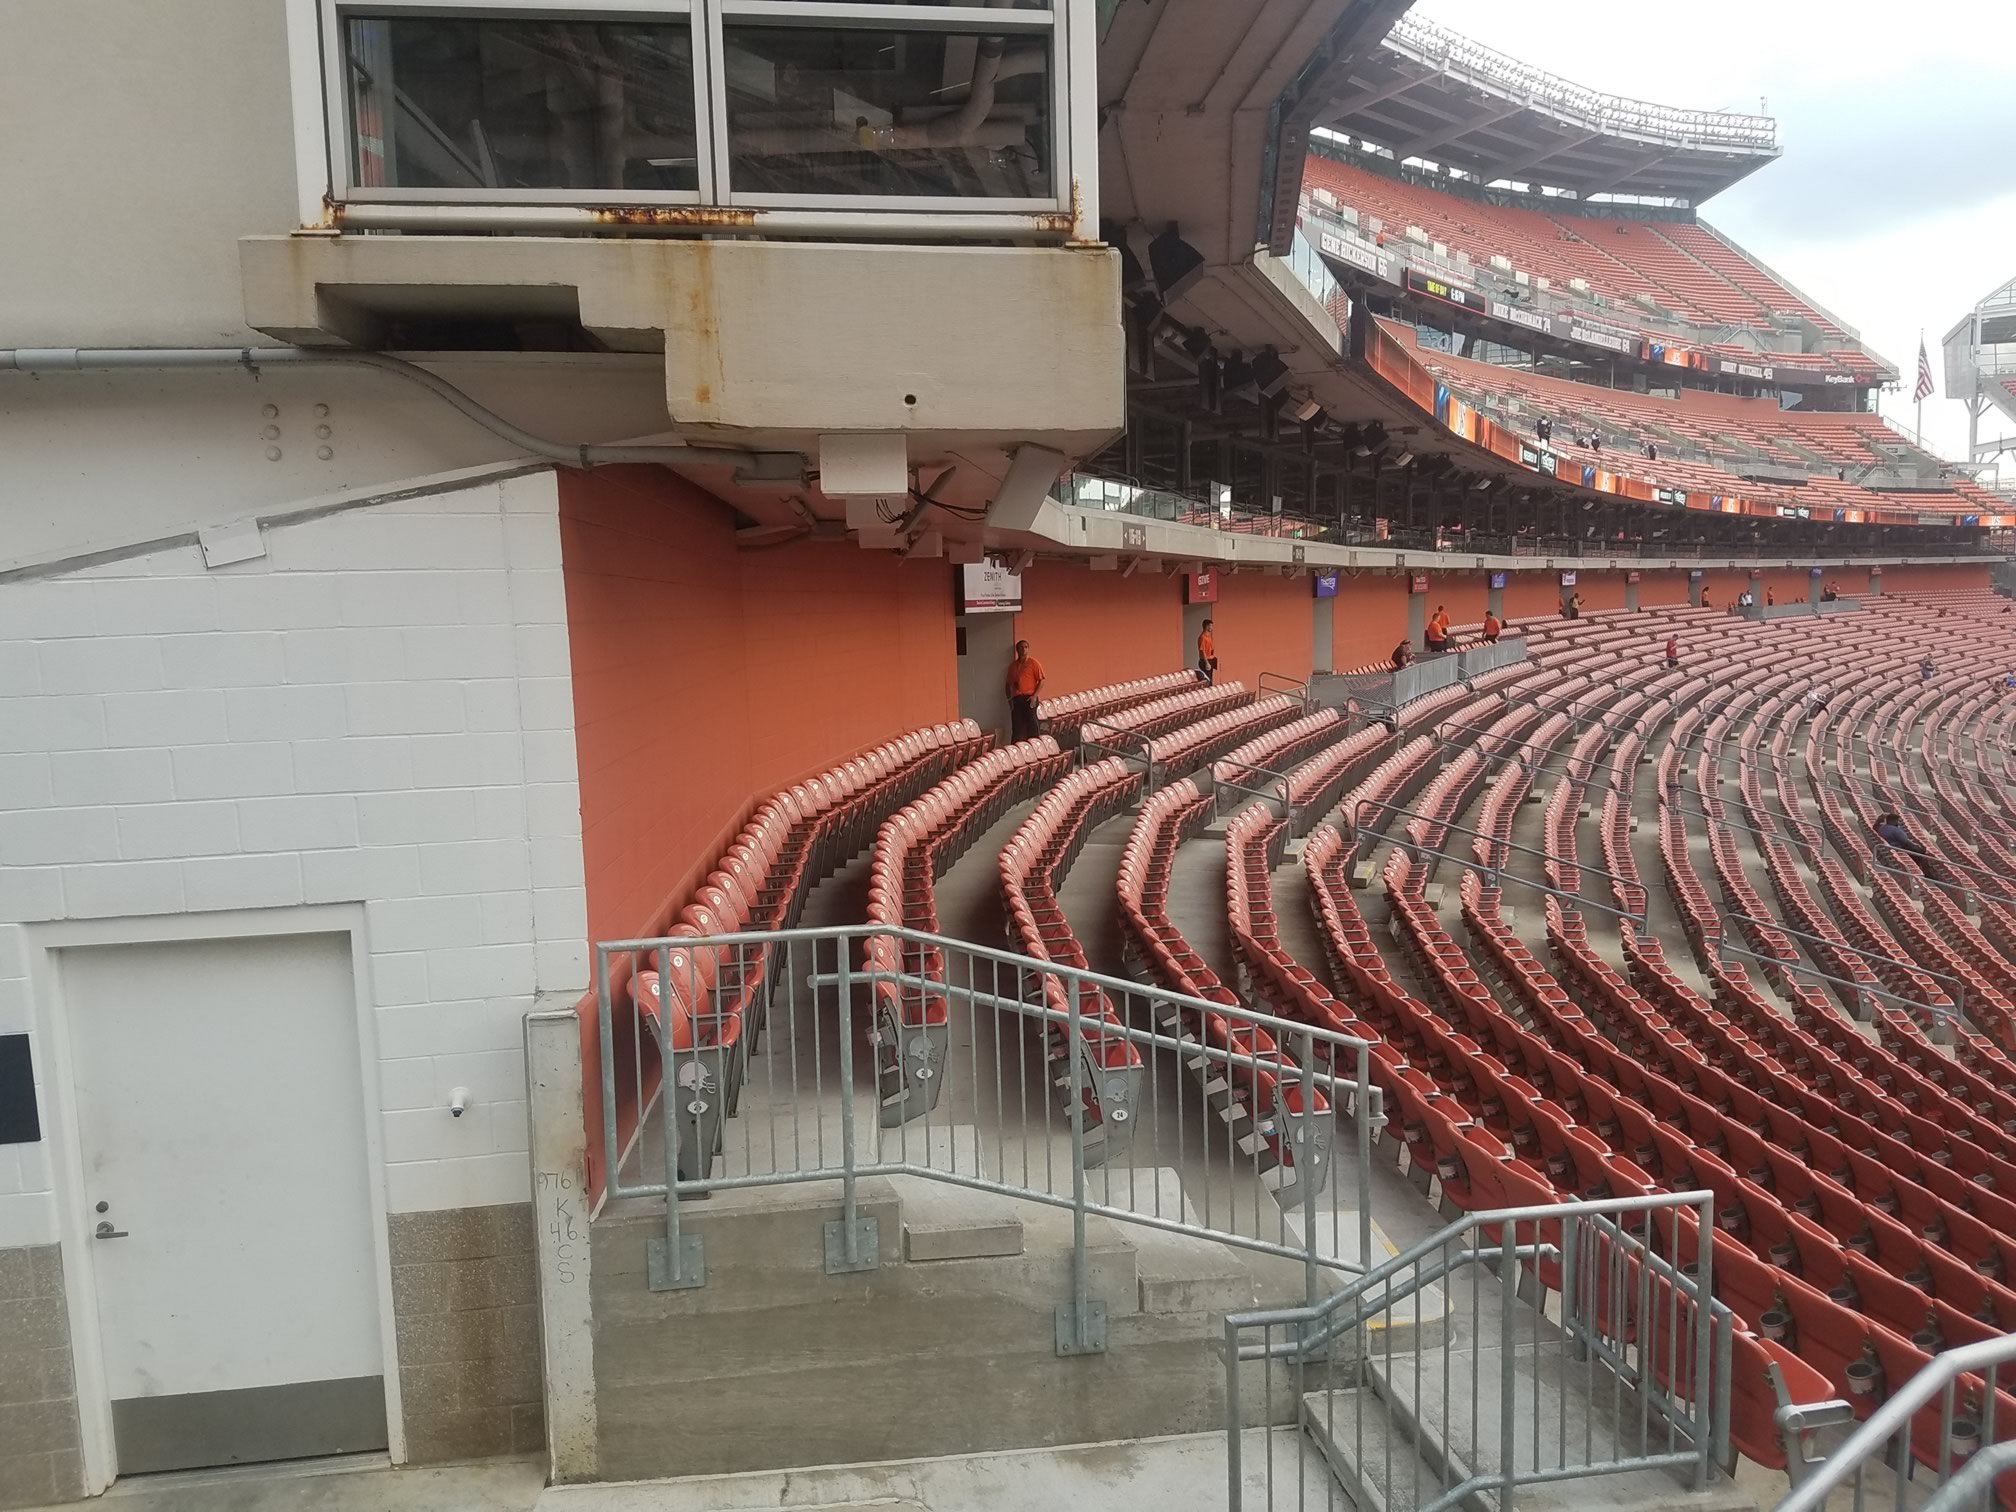 Club Level at Cleveland Browns Stadium during the Browns/Steelers